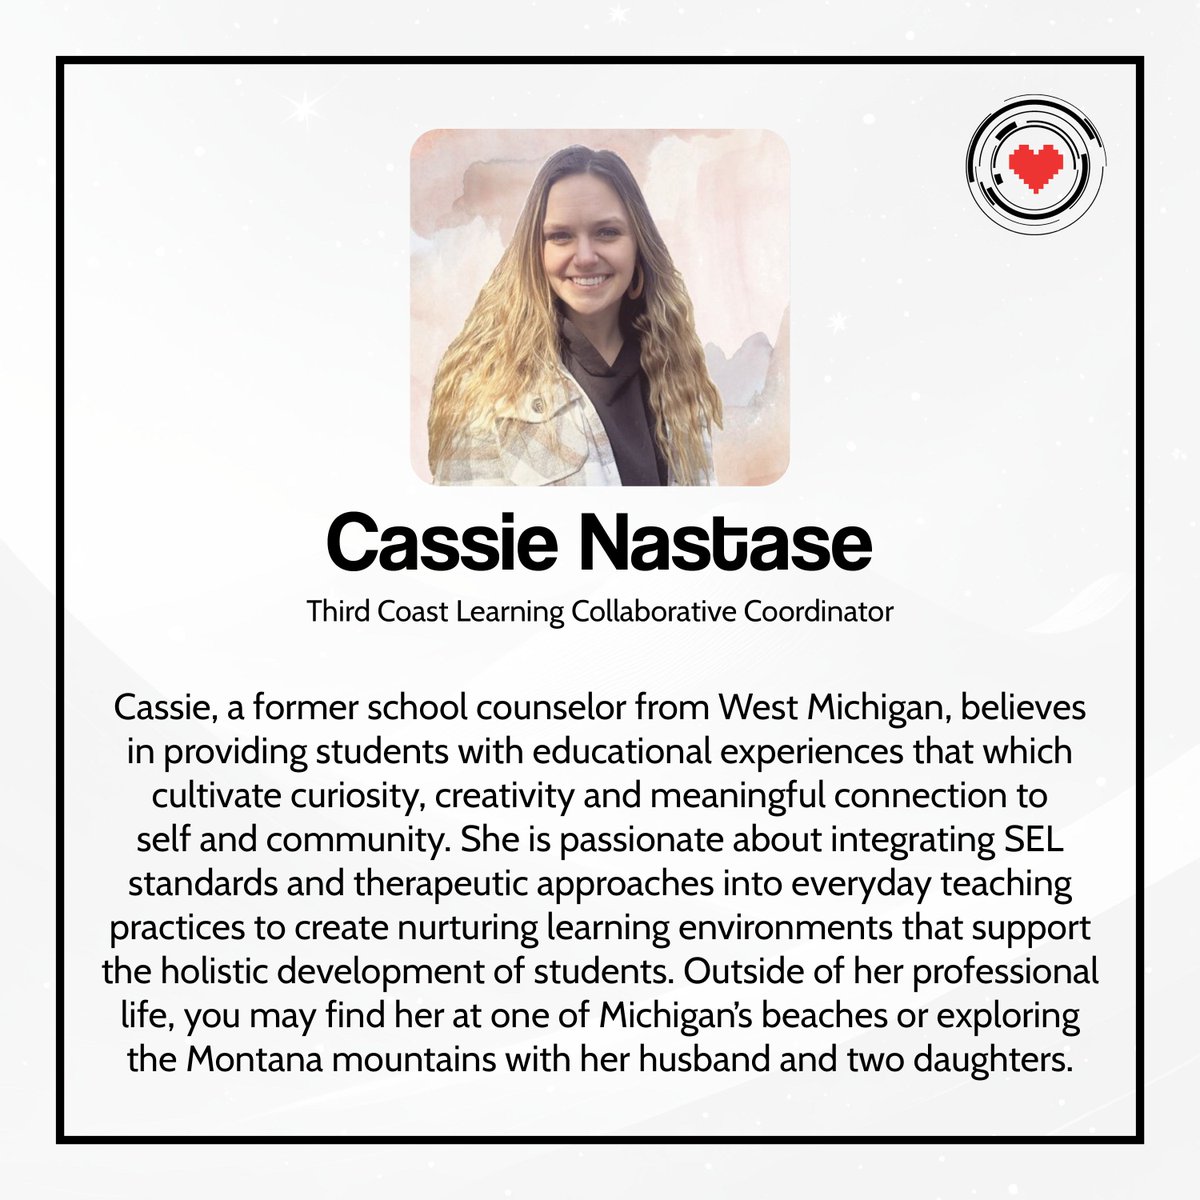 We're stoked and delighted to welcome Cassie Nastase as our 3rd full time employee at HRP!

Cassie will serve as our grant coordinator on our work in Muskegon, MI - joining our team to restore humanity to education. Welcome! #restorehumanity